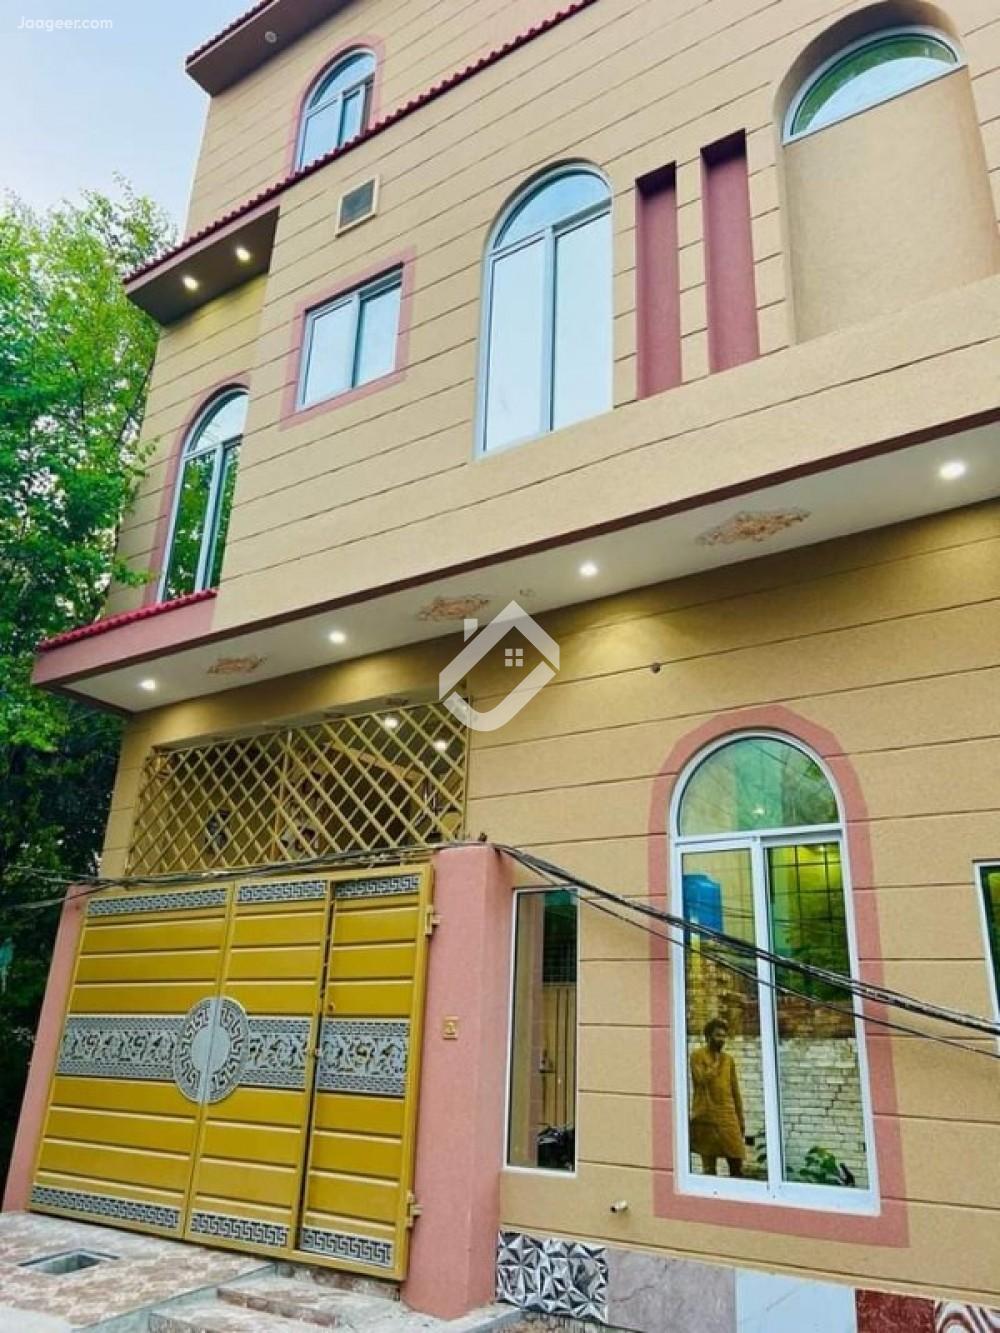 Main image 3 Marla Triple Storey House For Sale In Shadab Housing Society --